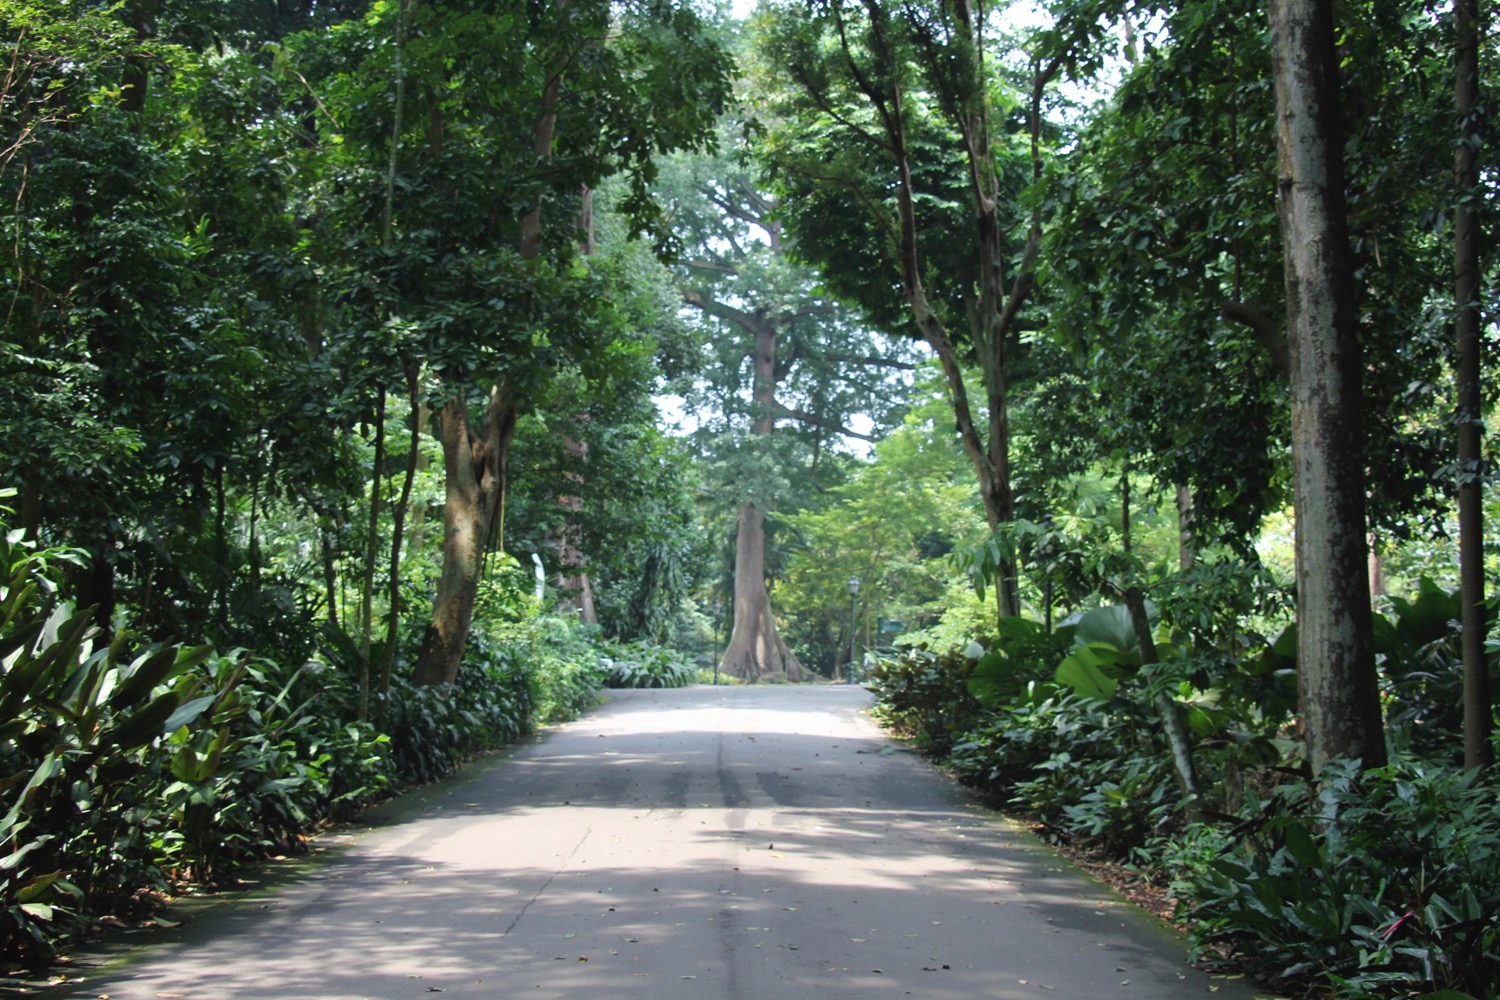 a road with trees and plants around it